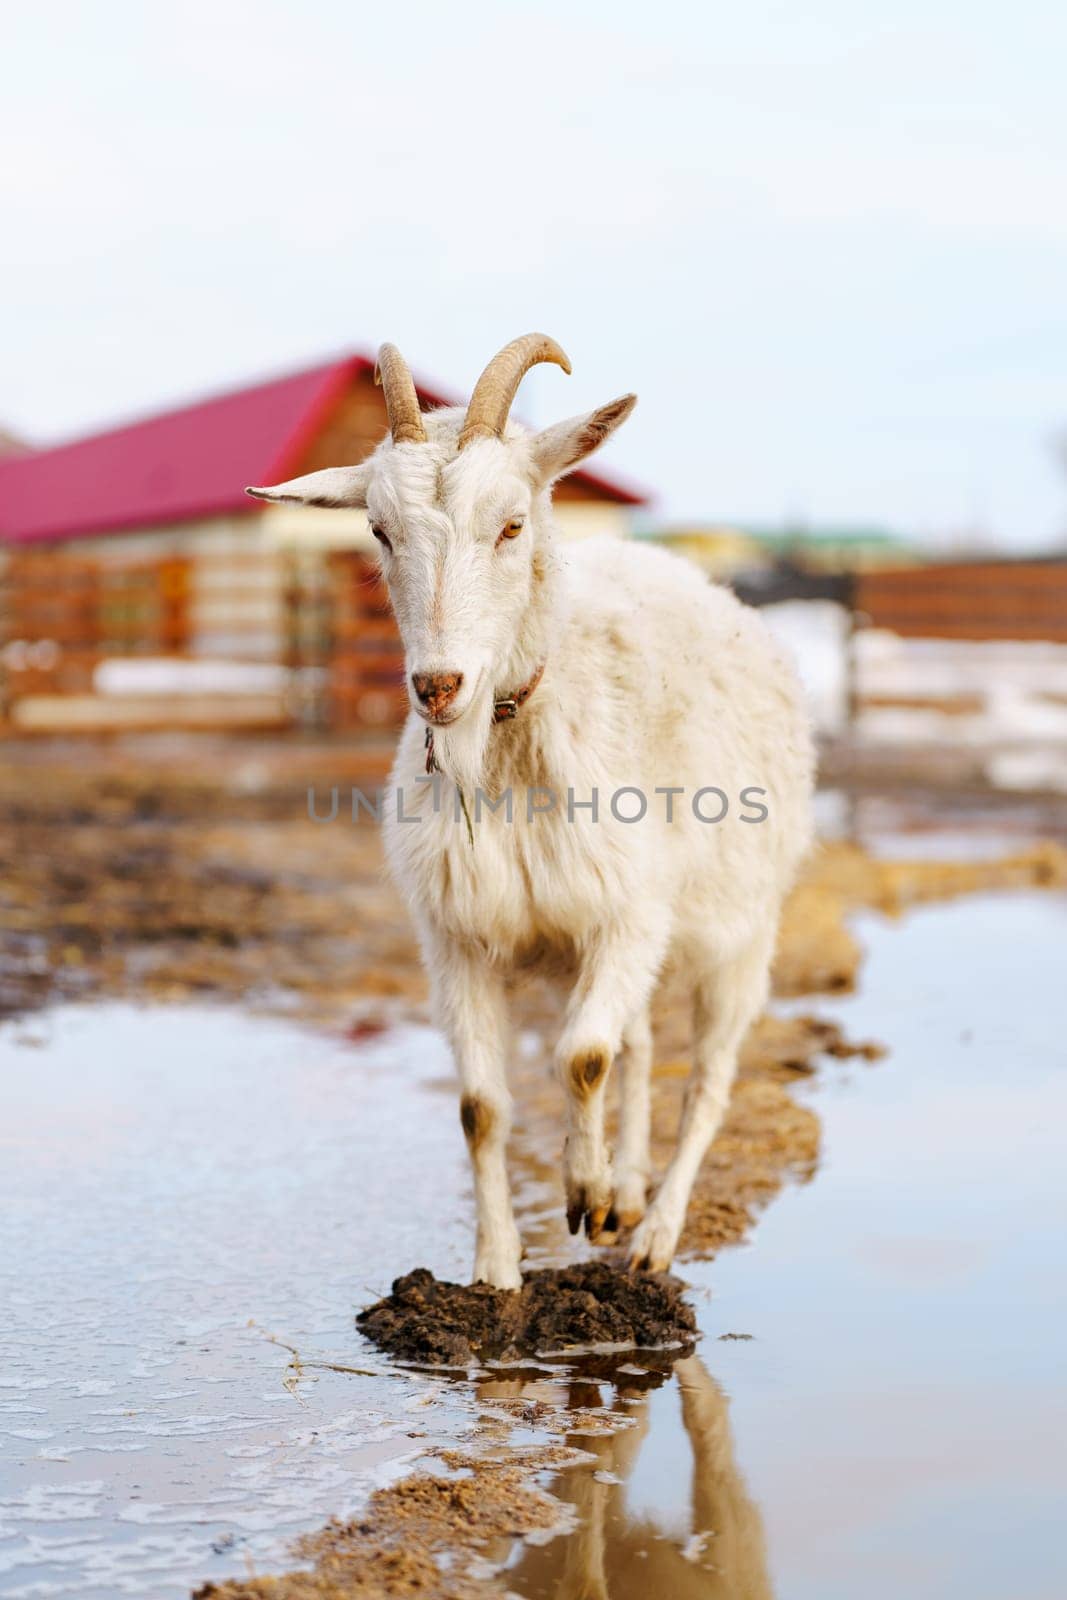 Goat on farm look peaceful and content in their enclosed environment. Selective focus. Vertical photo